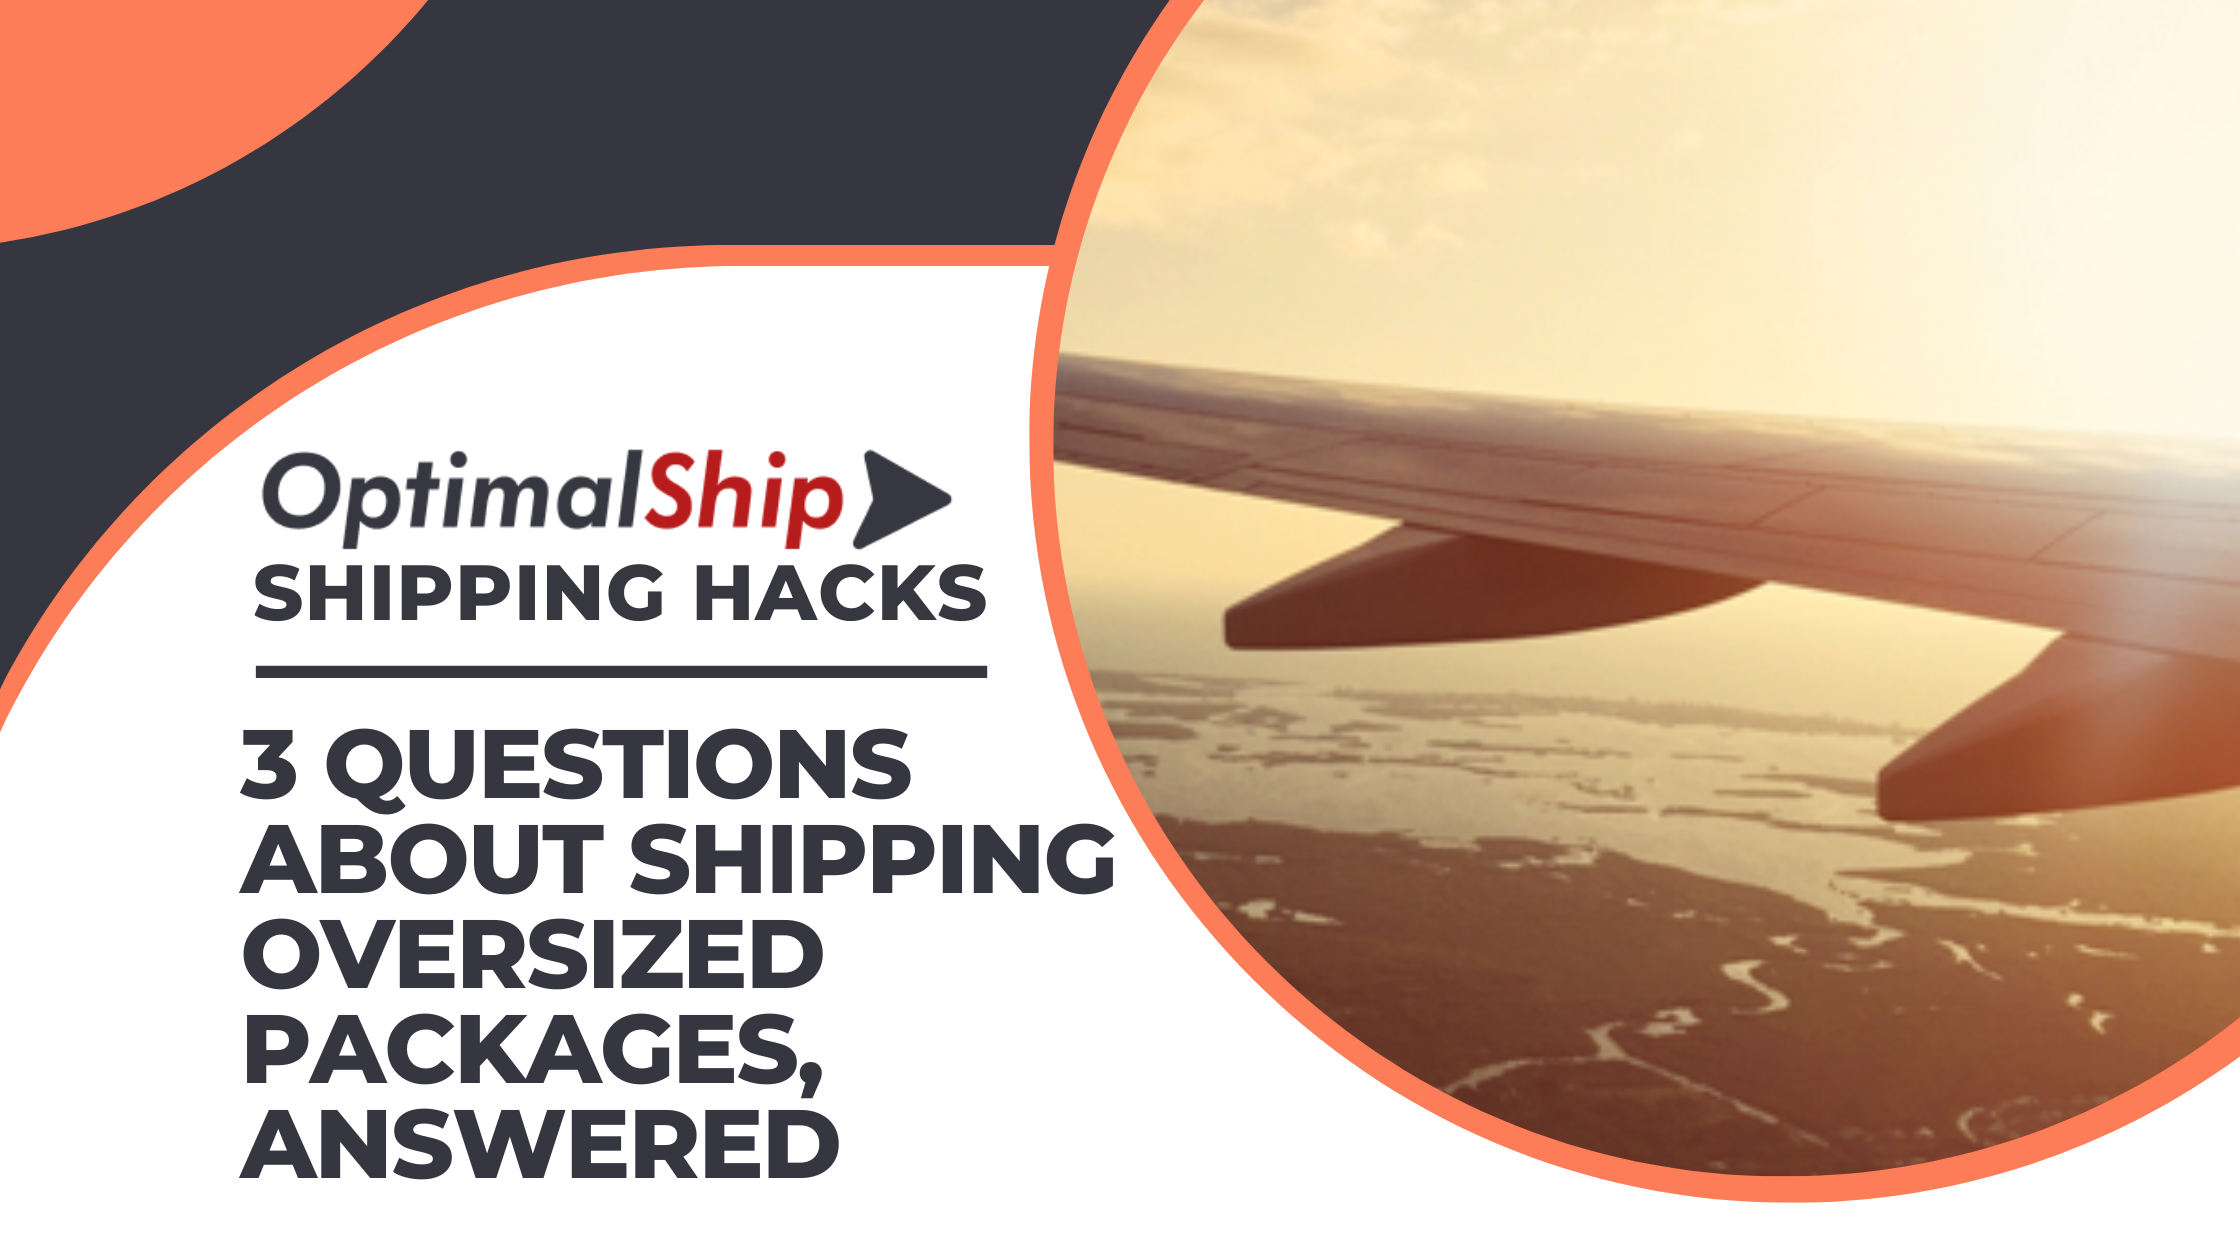 3 Questions About Shipping Heavy Parcels - Answered